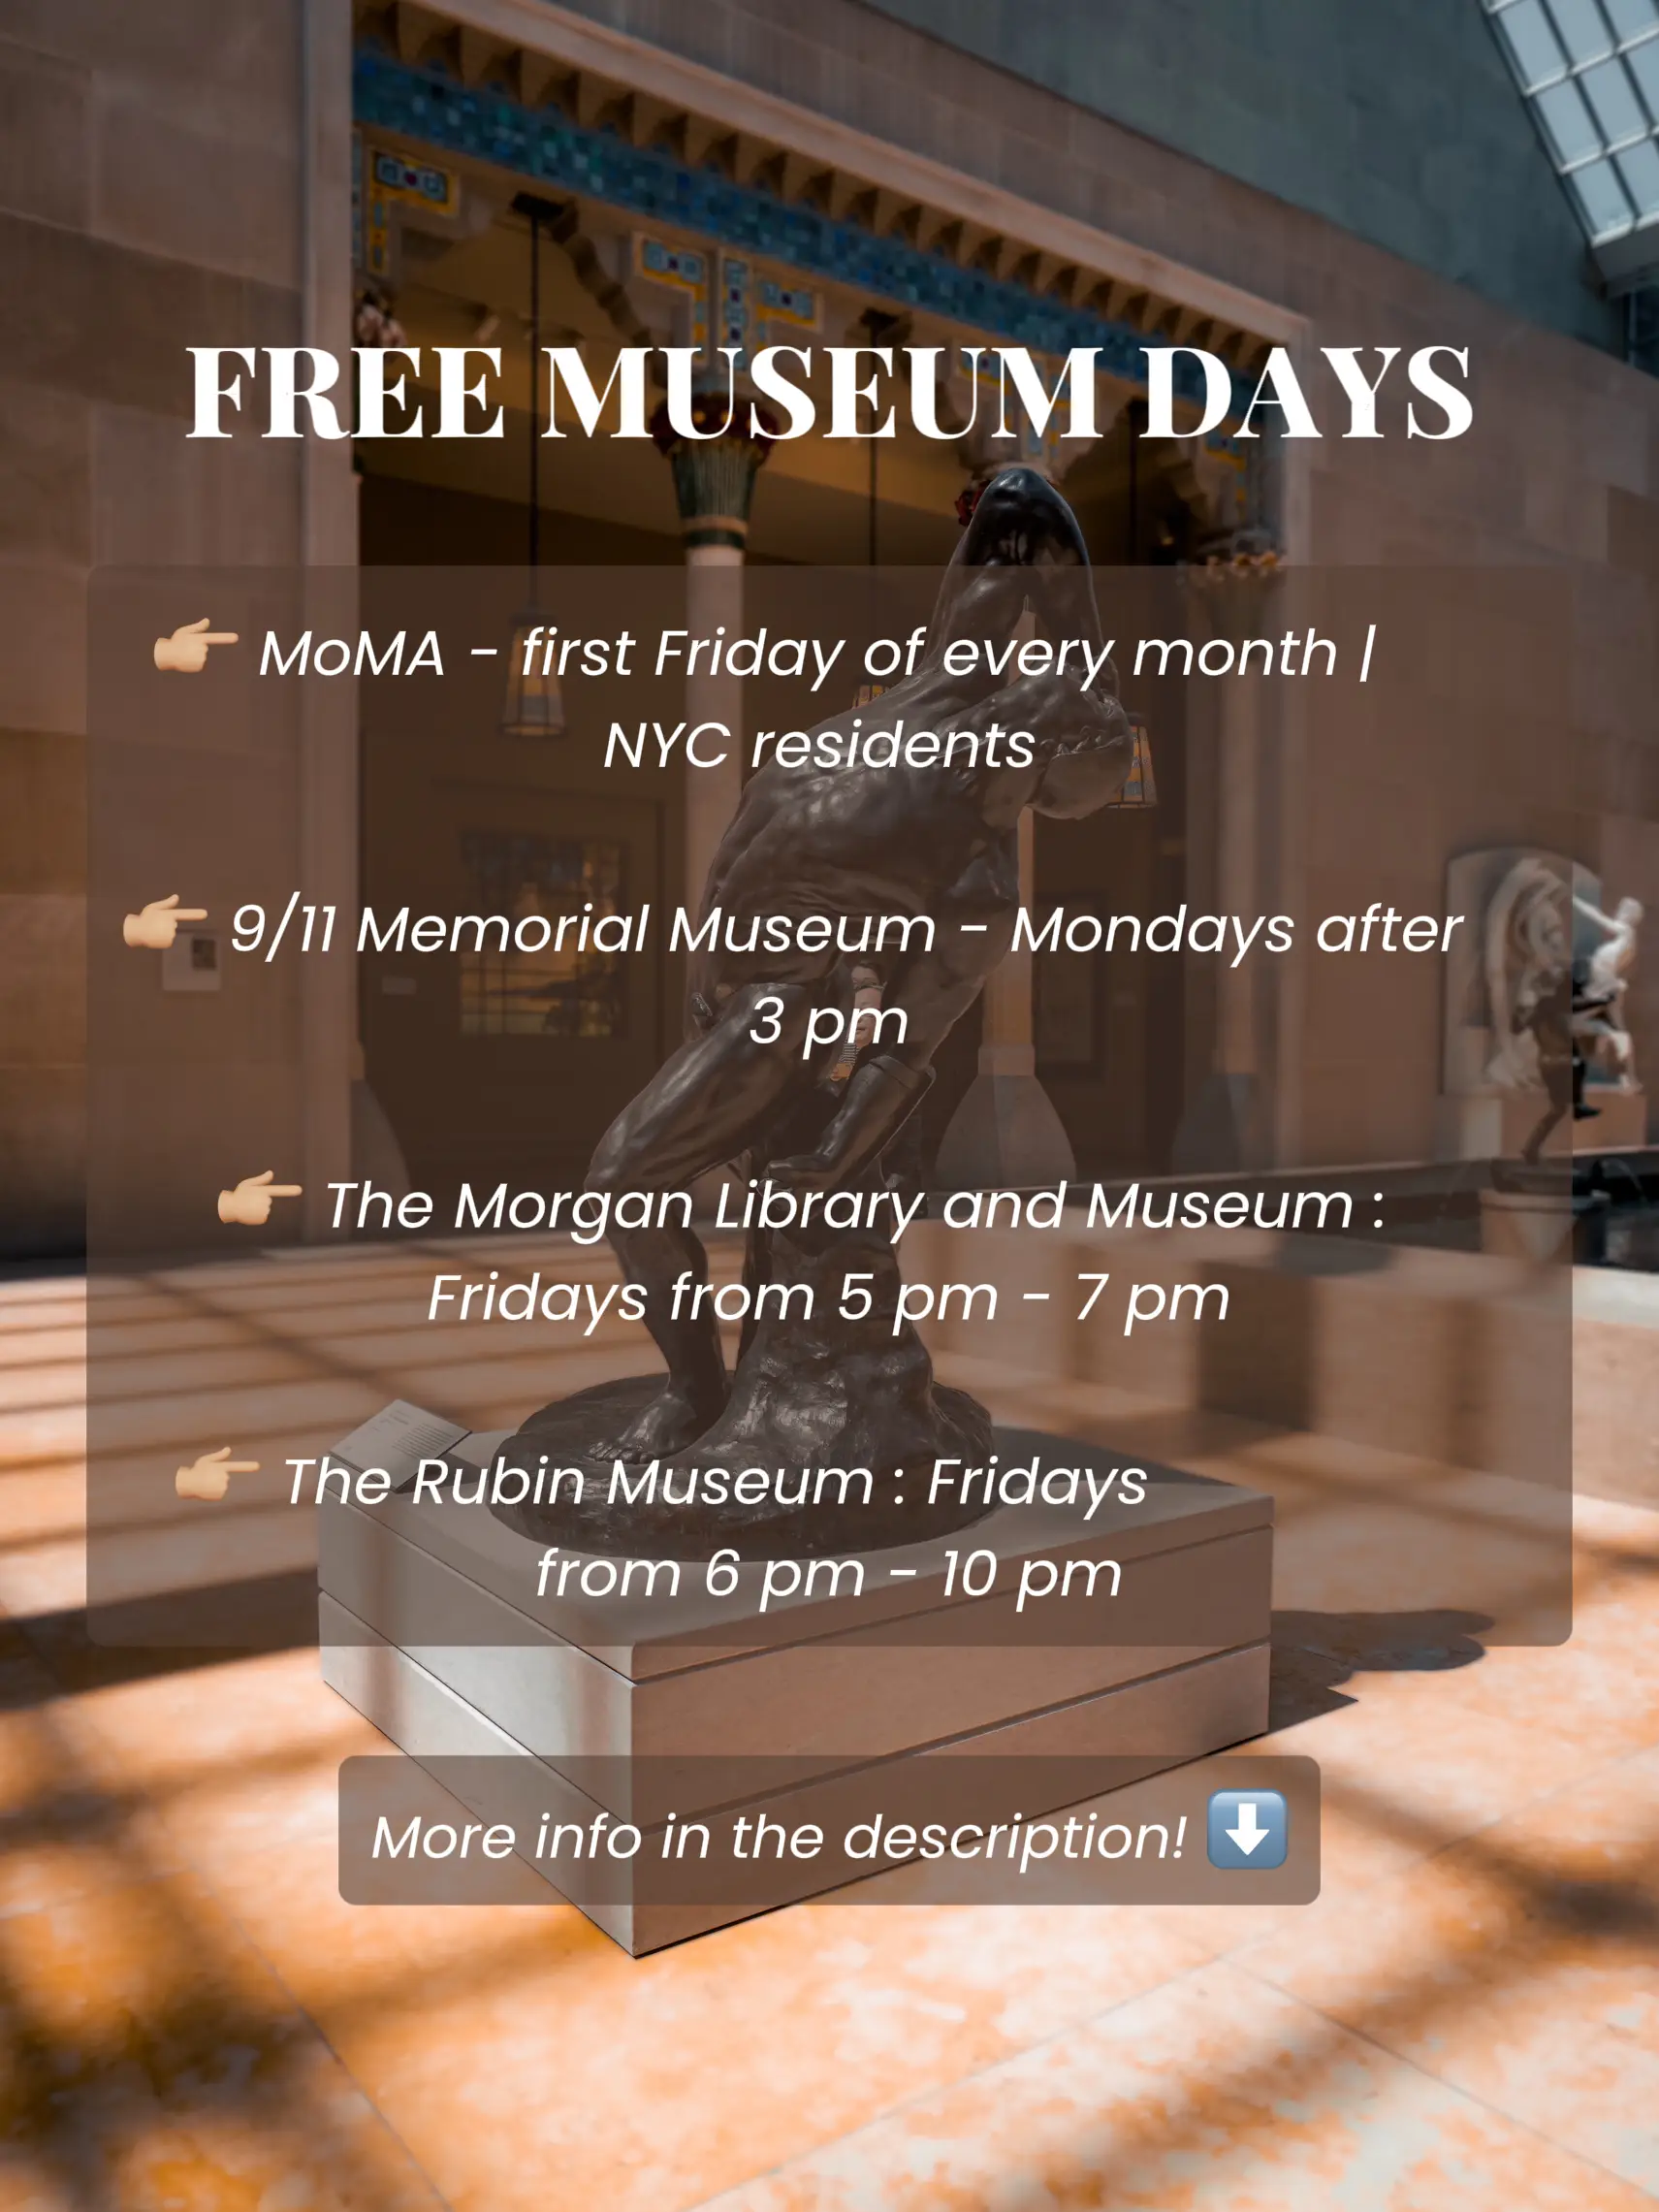  A list of free museum days in New York